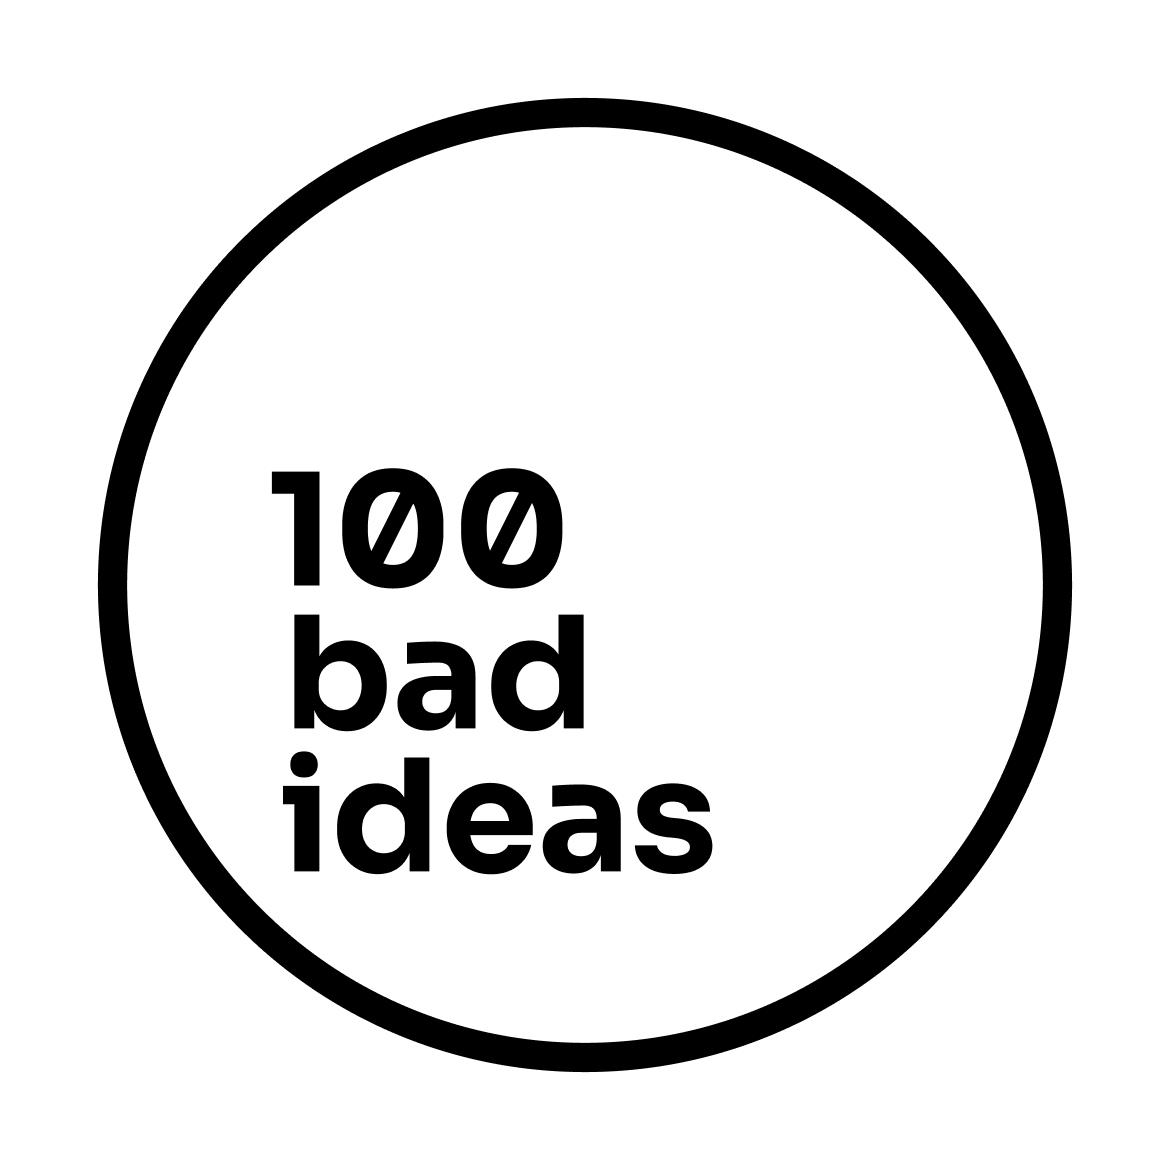 100 Bad Ideas's images